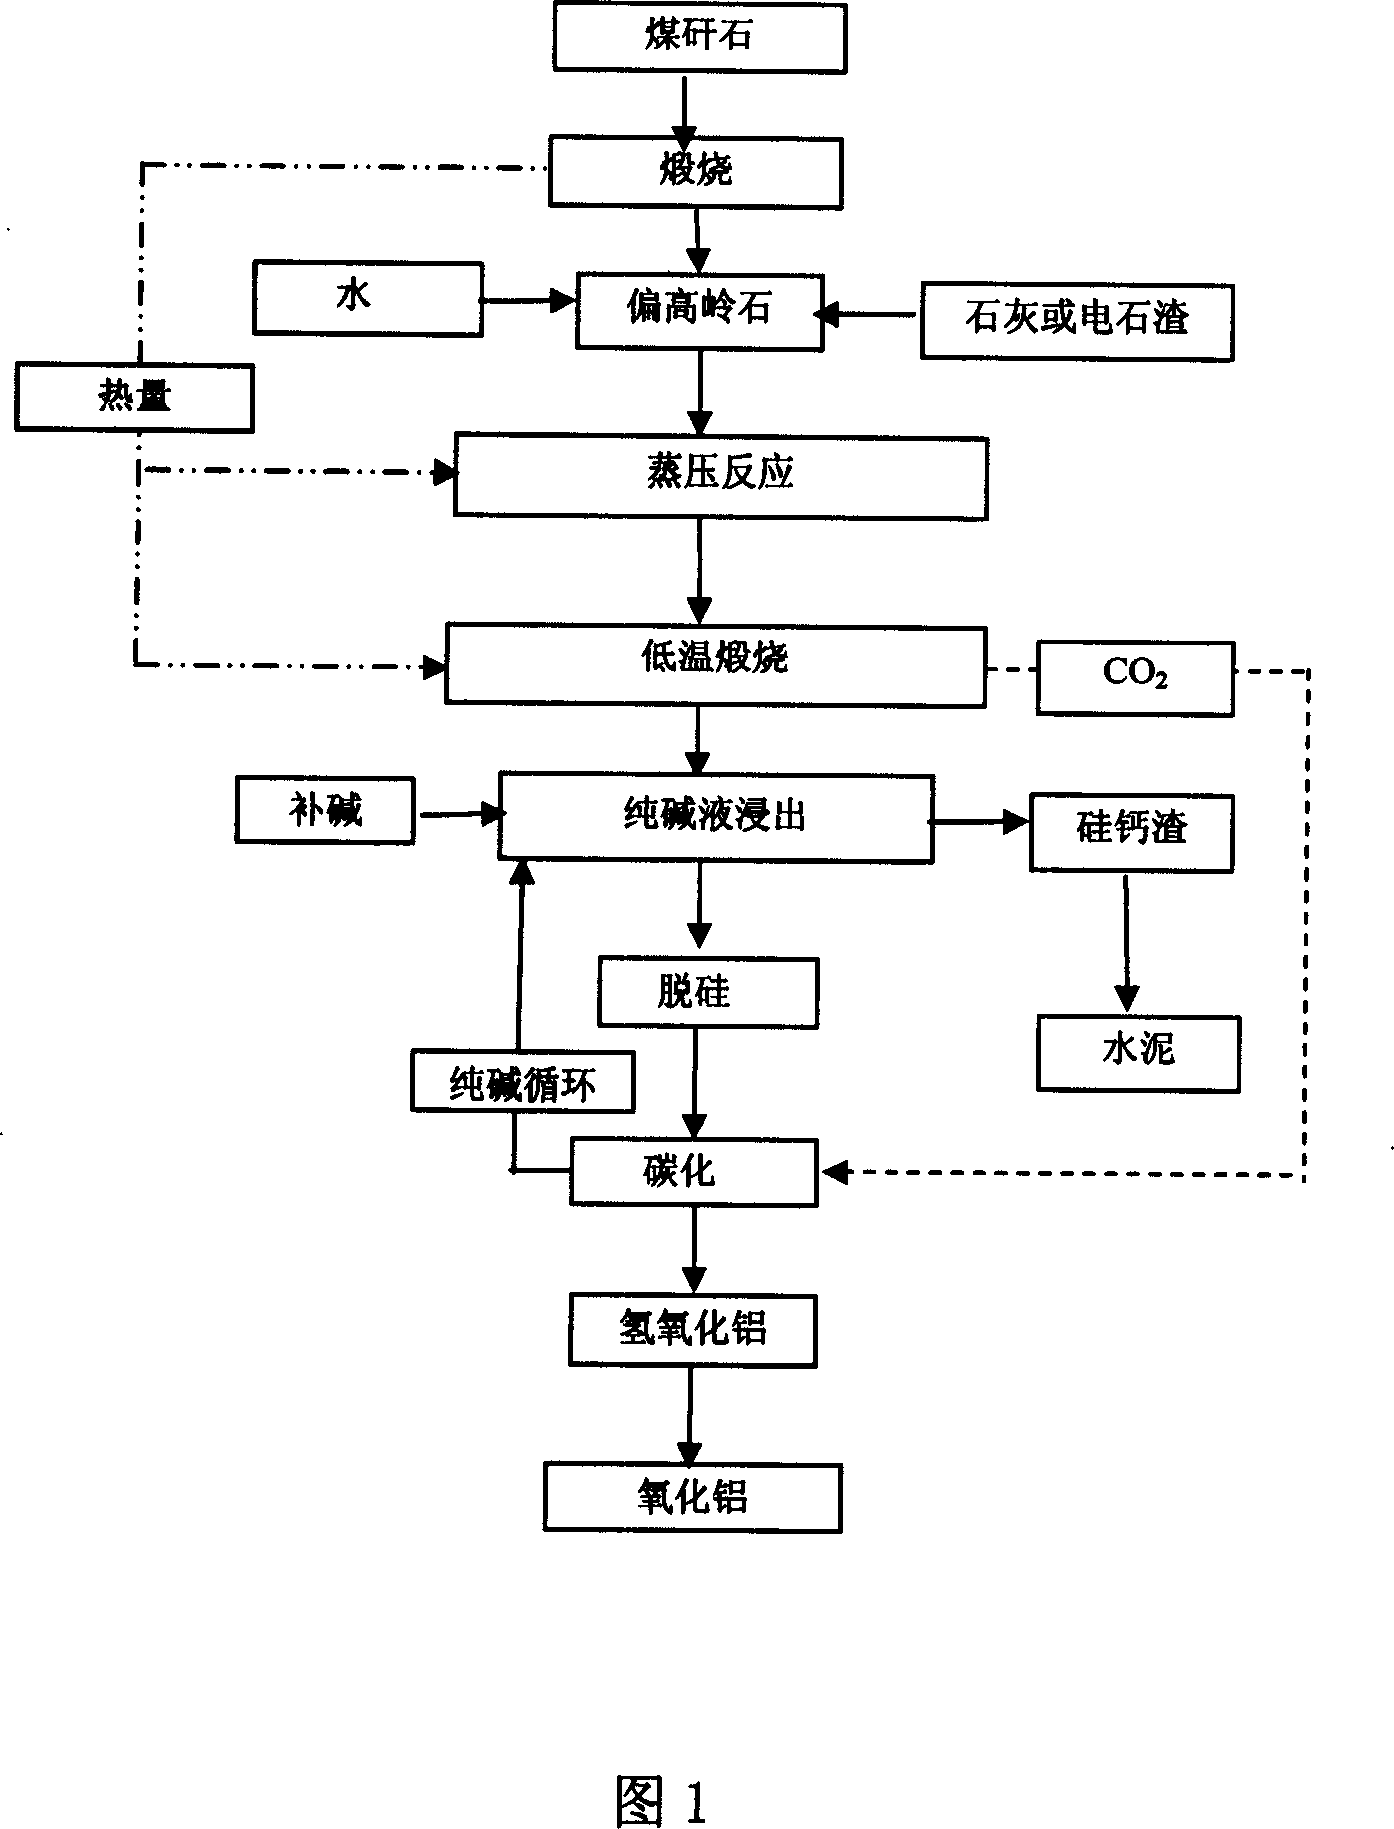 Method for extracting aluminum hydrate or alumina from coal gangue and method for producing cement from fag end